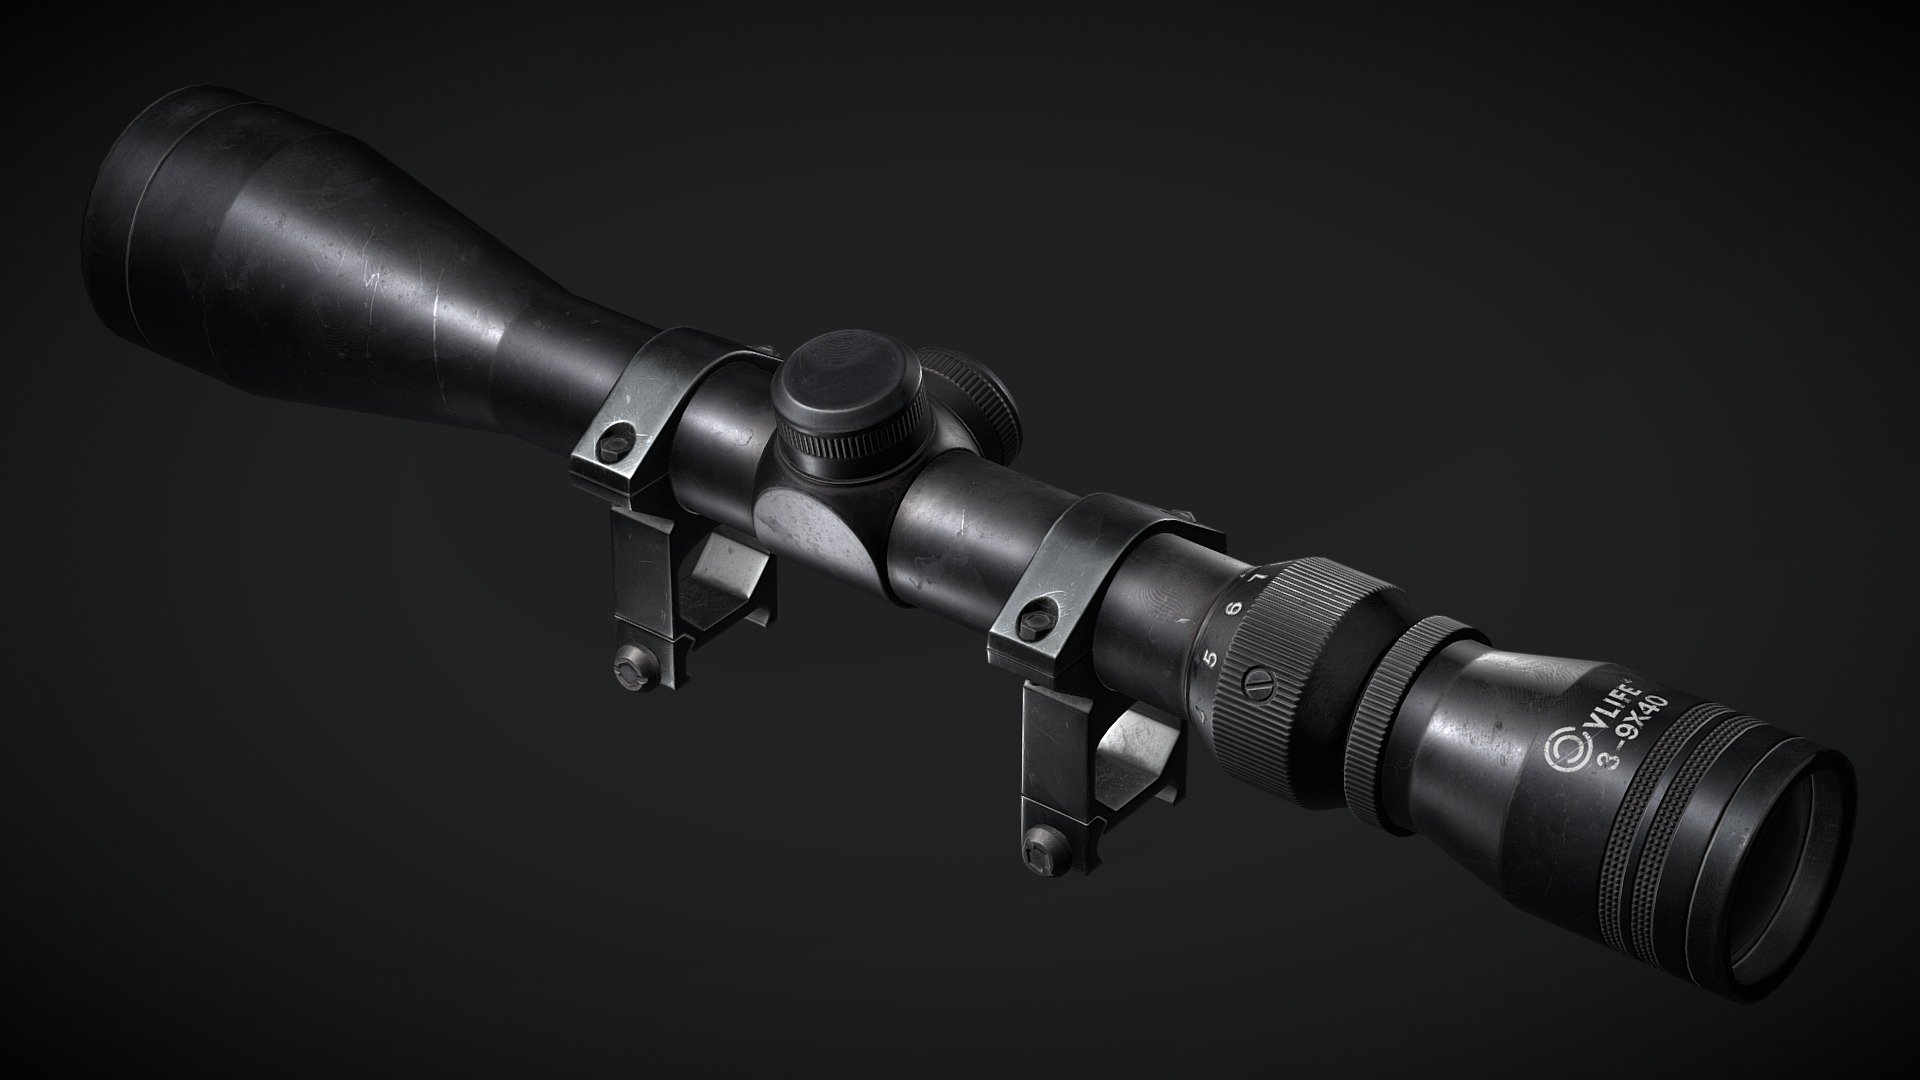 Game ready model, 3760 tris, 2K 1 textures set, PBR Specular/Glossiness workflow - Sniper Scope - CVLIFE Tactical 3-9x40 - 3D model by Fedor Sokol (@finevision) 3d model